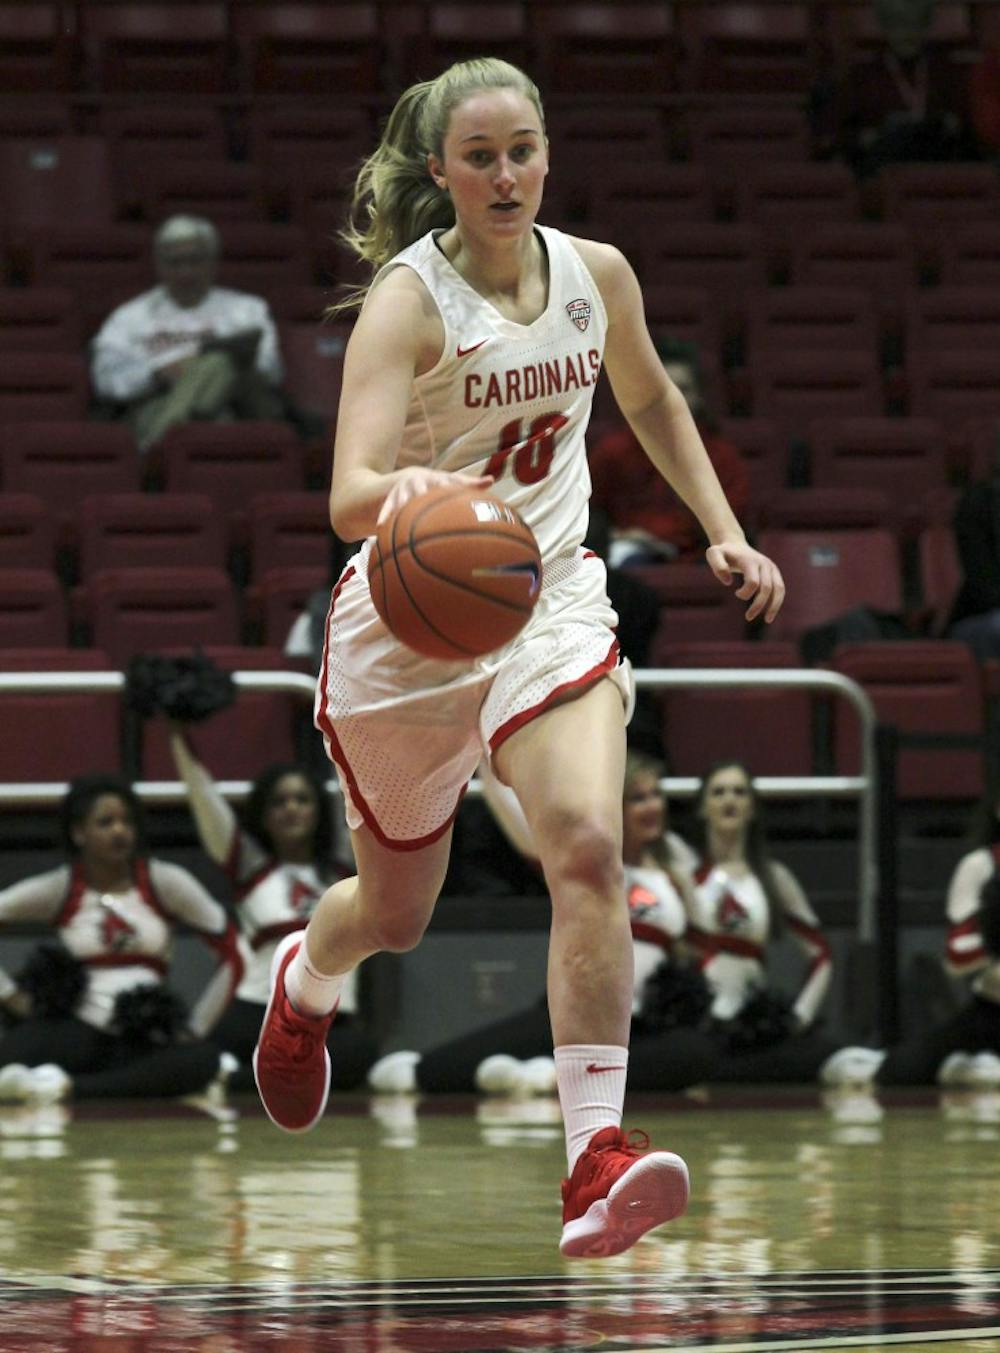 <p>Ball State freshman forward Thelma Dis Agustsdottir brings the ball down the court during the Cardinals' game against Cleveland State University's Nov. 11, 2018 in John E. Worthen Arena. Dis Agustsdottir scored 11 points. <strong>Paige Grider, DN</strong></p>